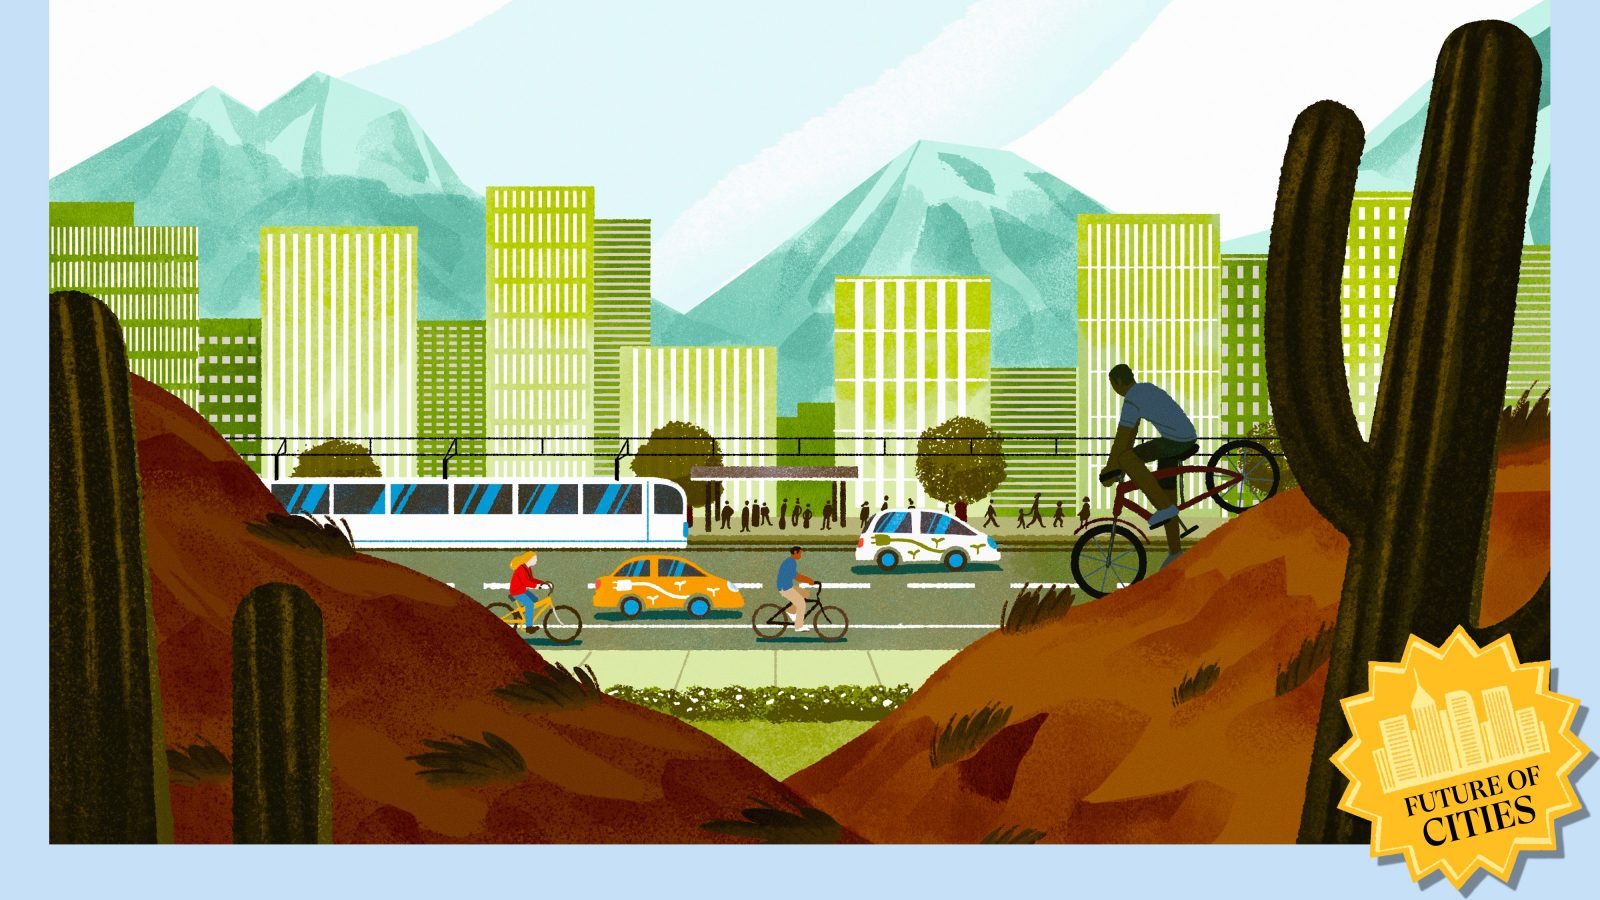 Illustration of a sustainable desert city, with EVs, vegetation, and bikes